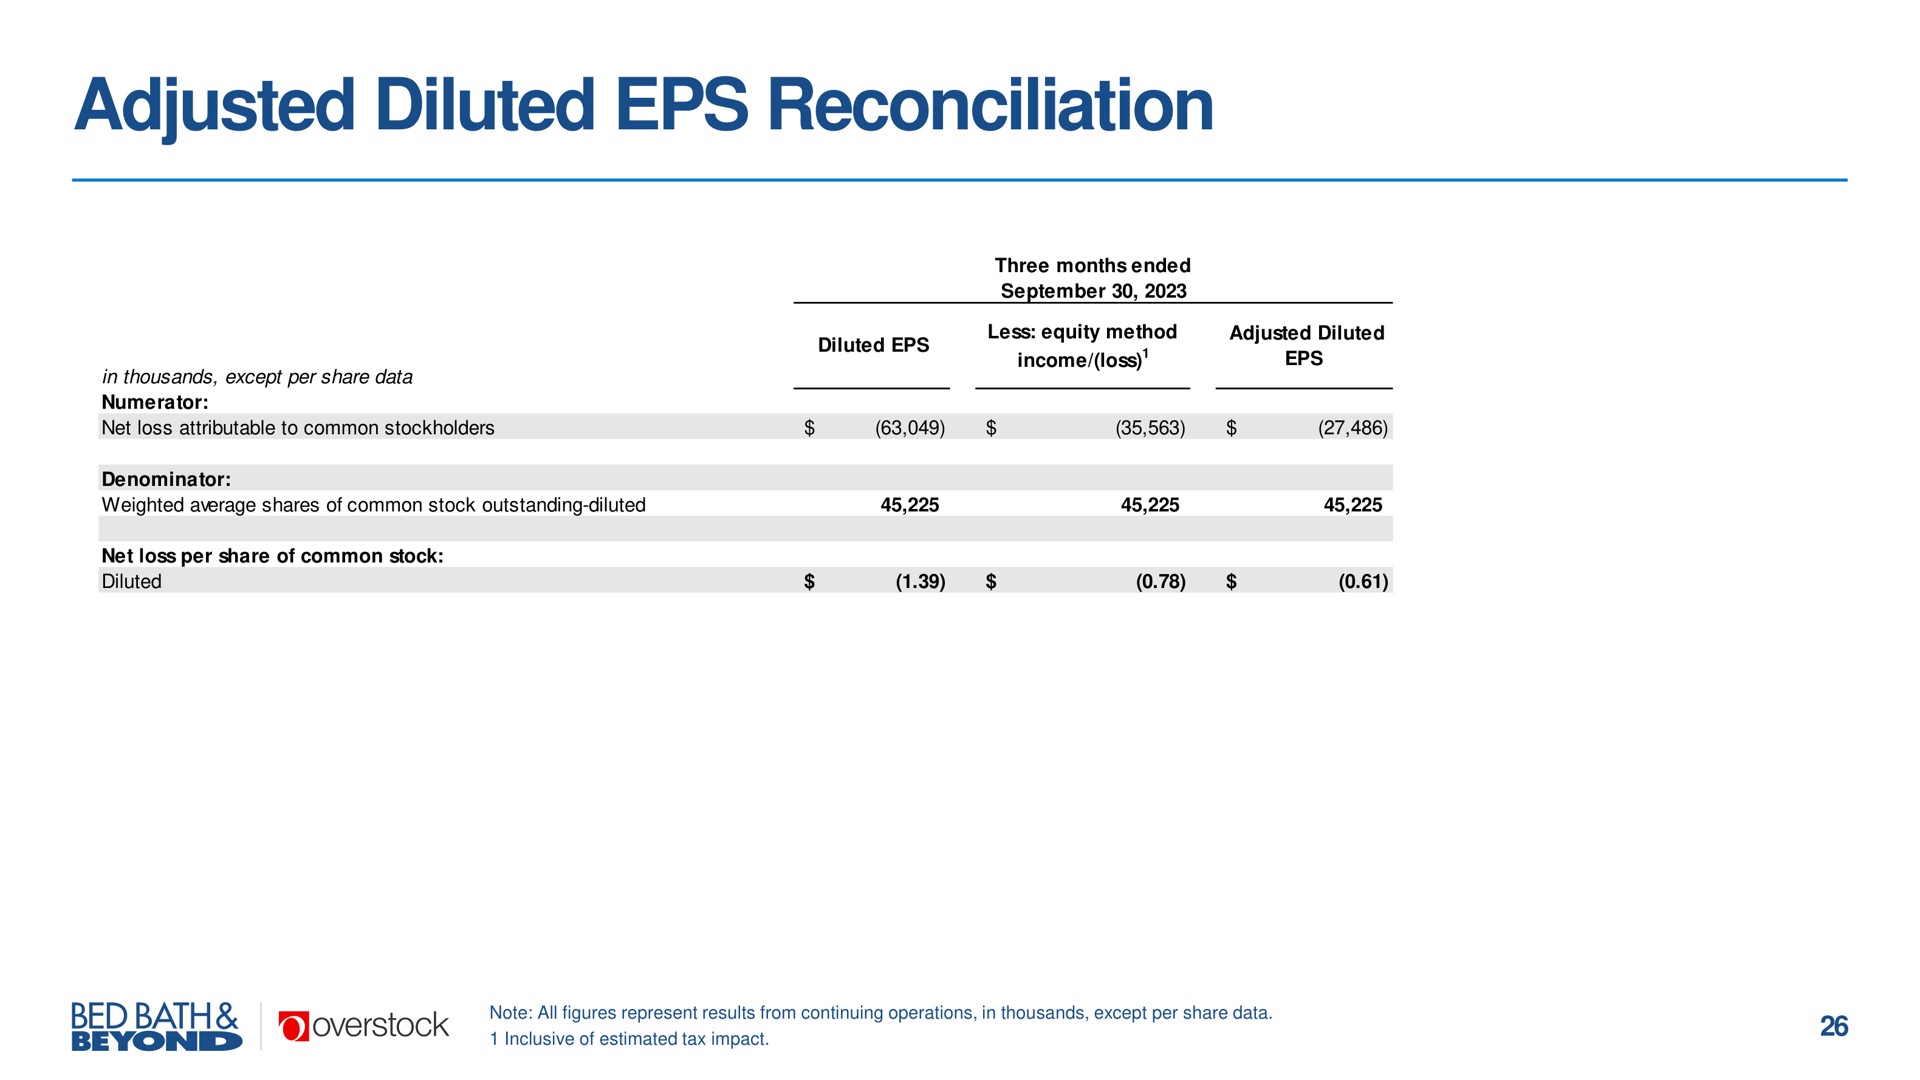 adjusted diluted reconciliation | Overstock